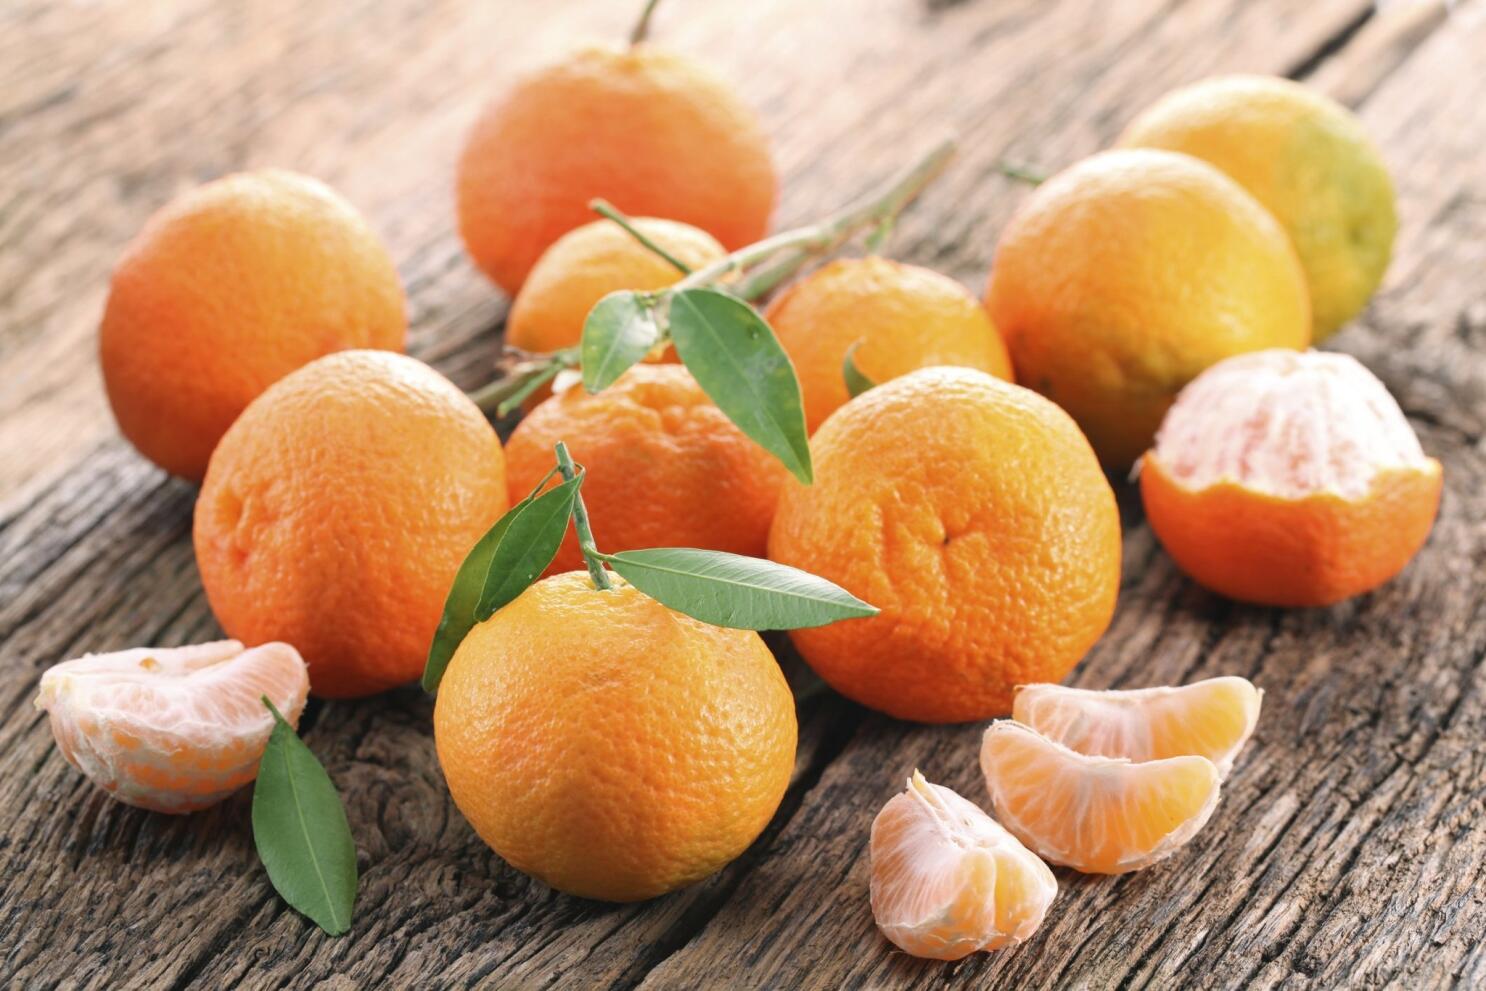 Tangerines are more than just delicious - The San Diego Union-Tribune